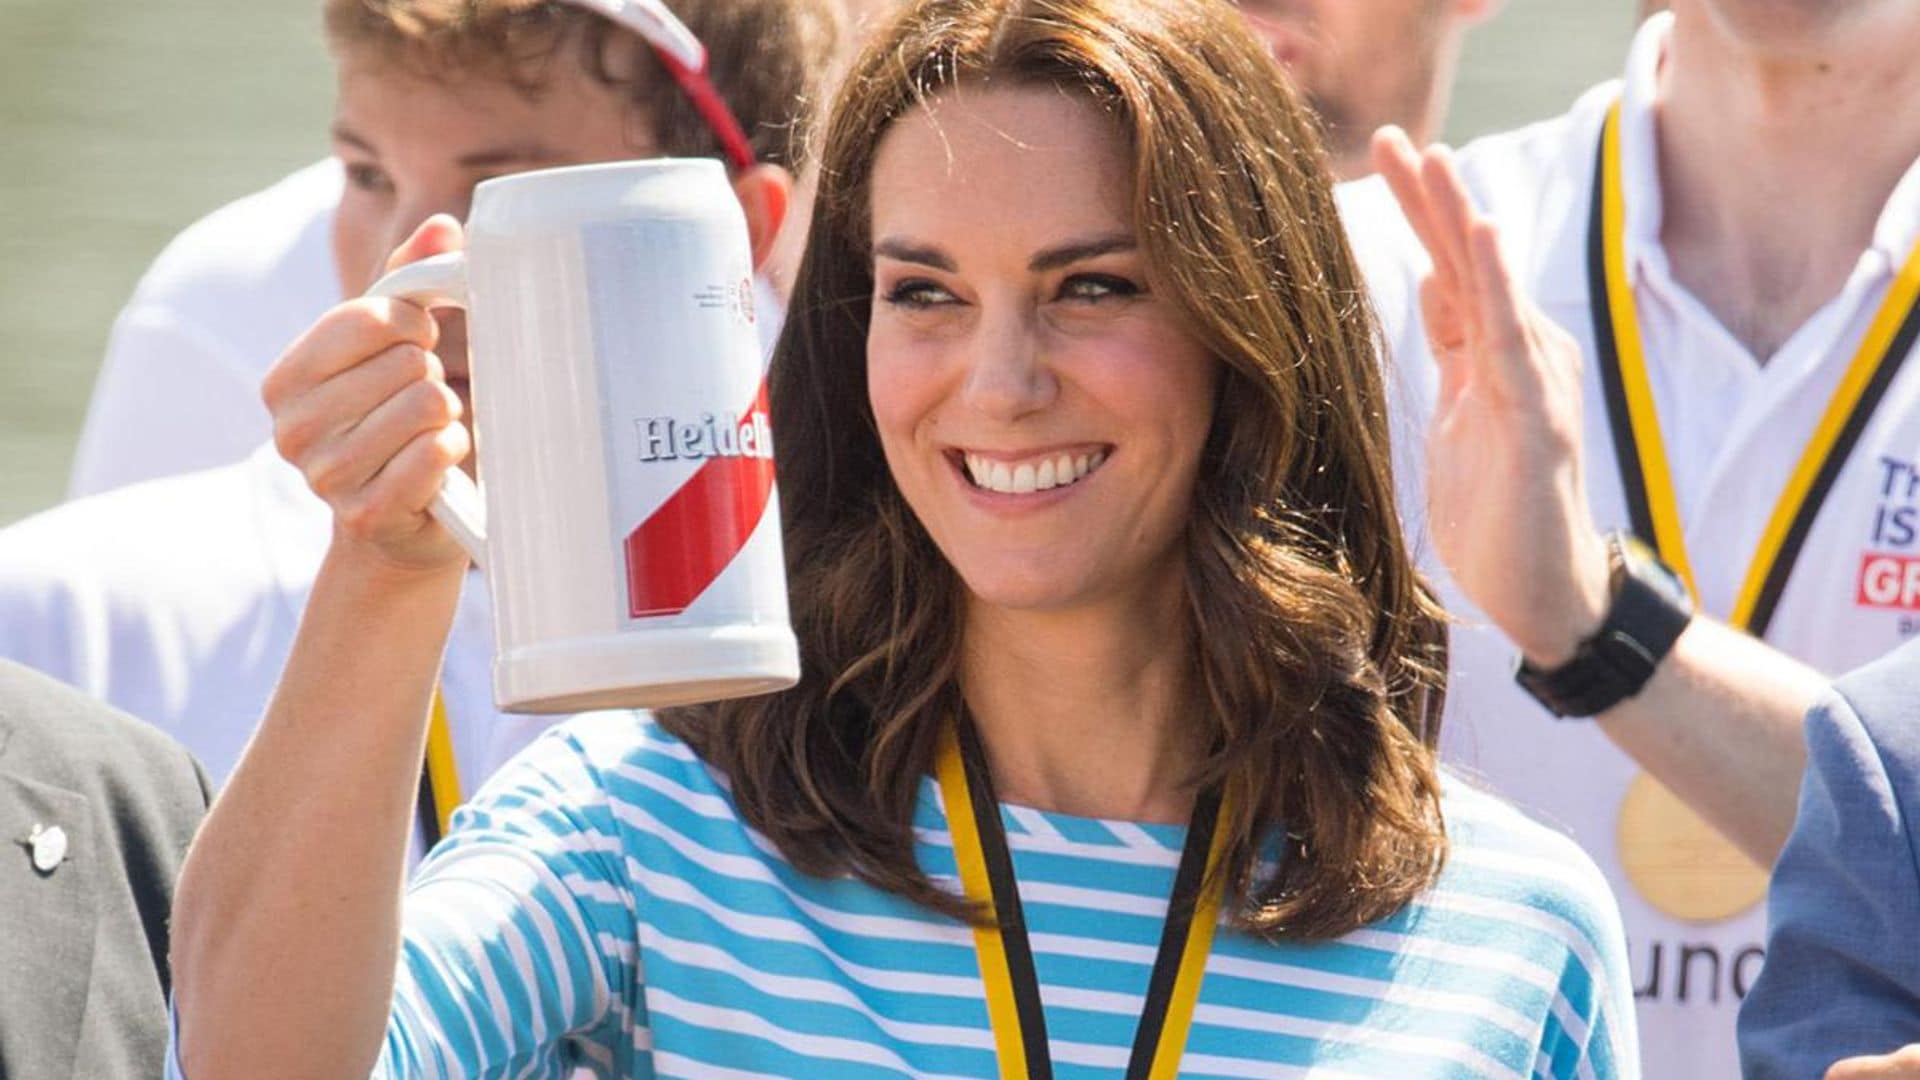 Royal family member reveals the Princess of Wales is competitive about beer pong